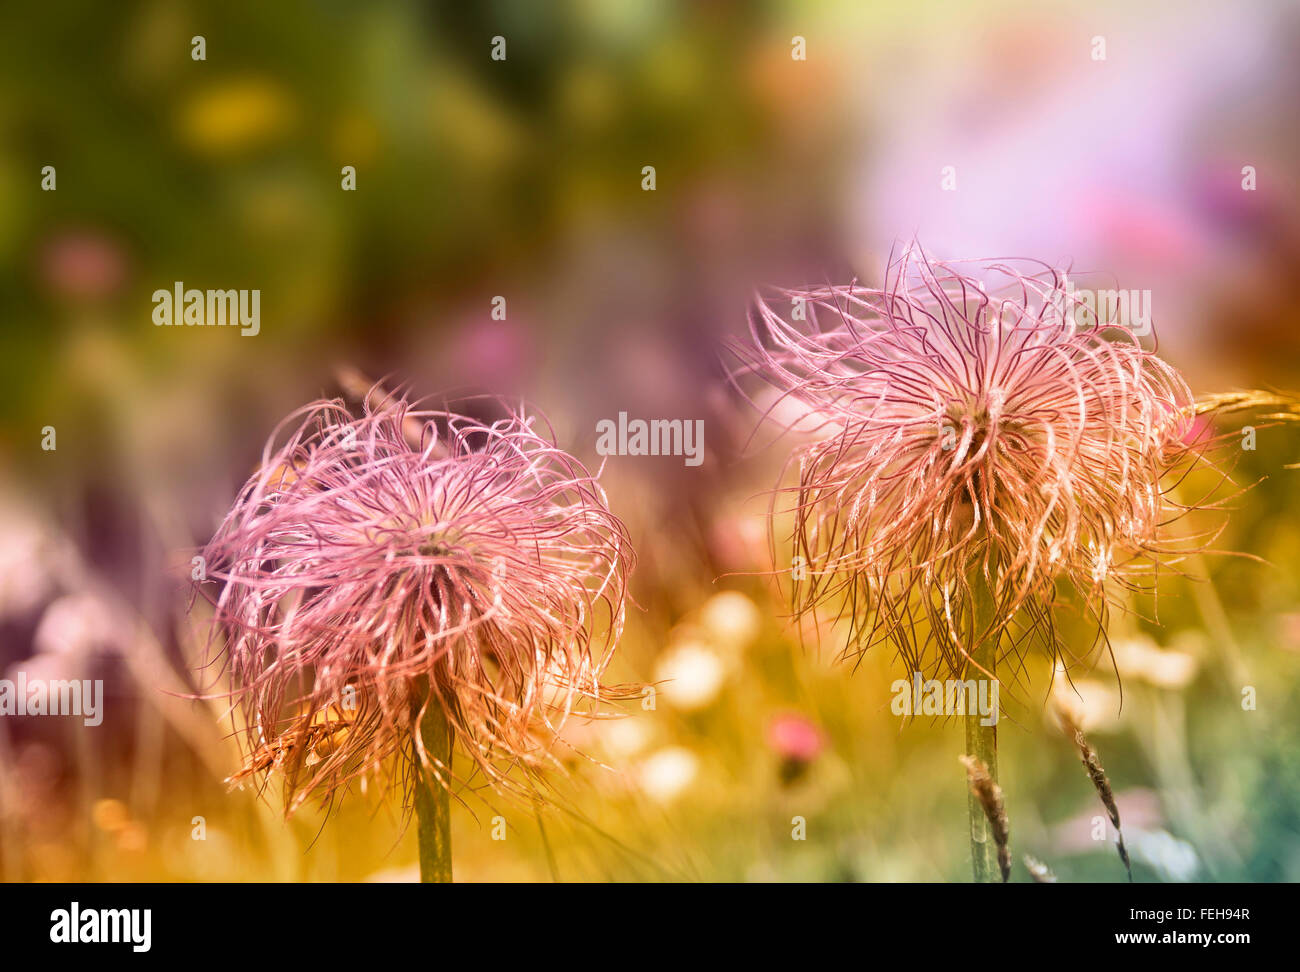 Wallpaper floral background .Creative style with colored filters. Pulsatilla vulgaris (Alpine pasque flower), Alps mountains. Stock Photo